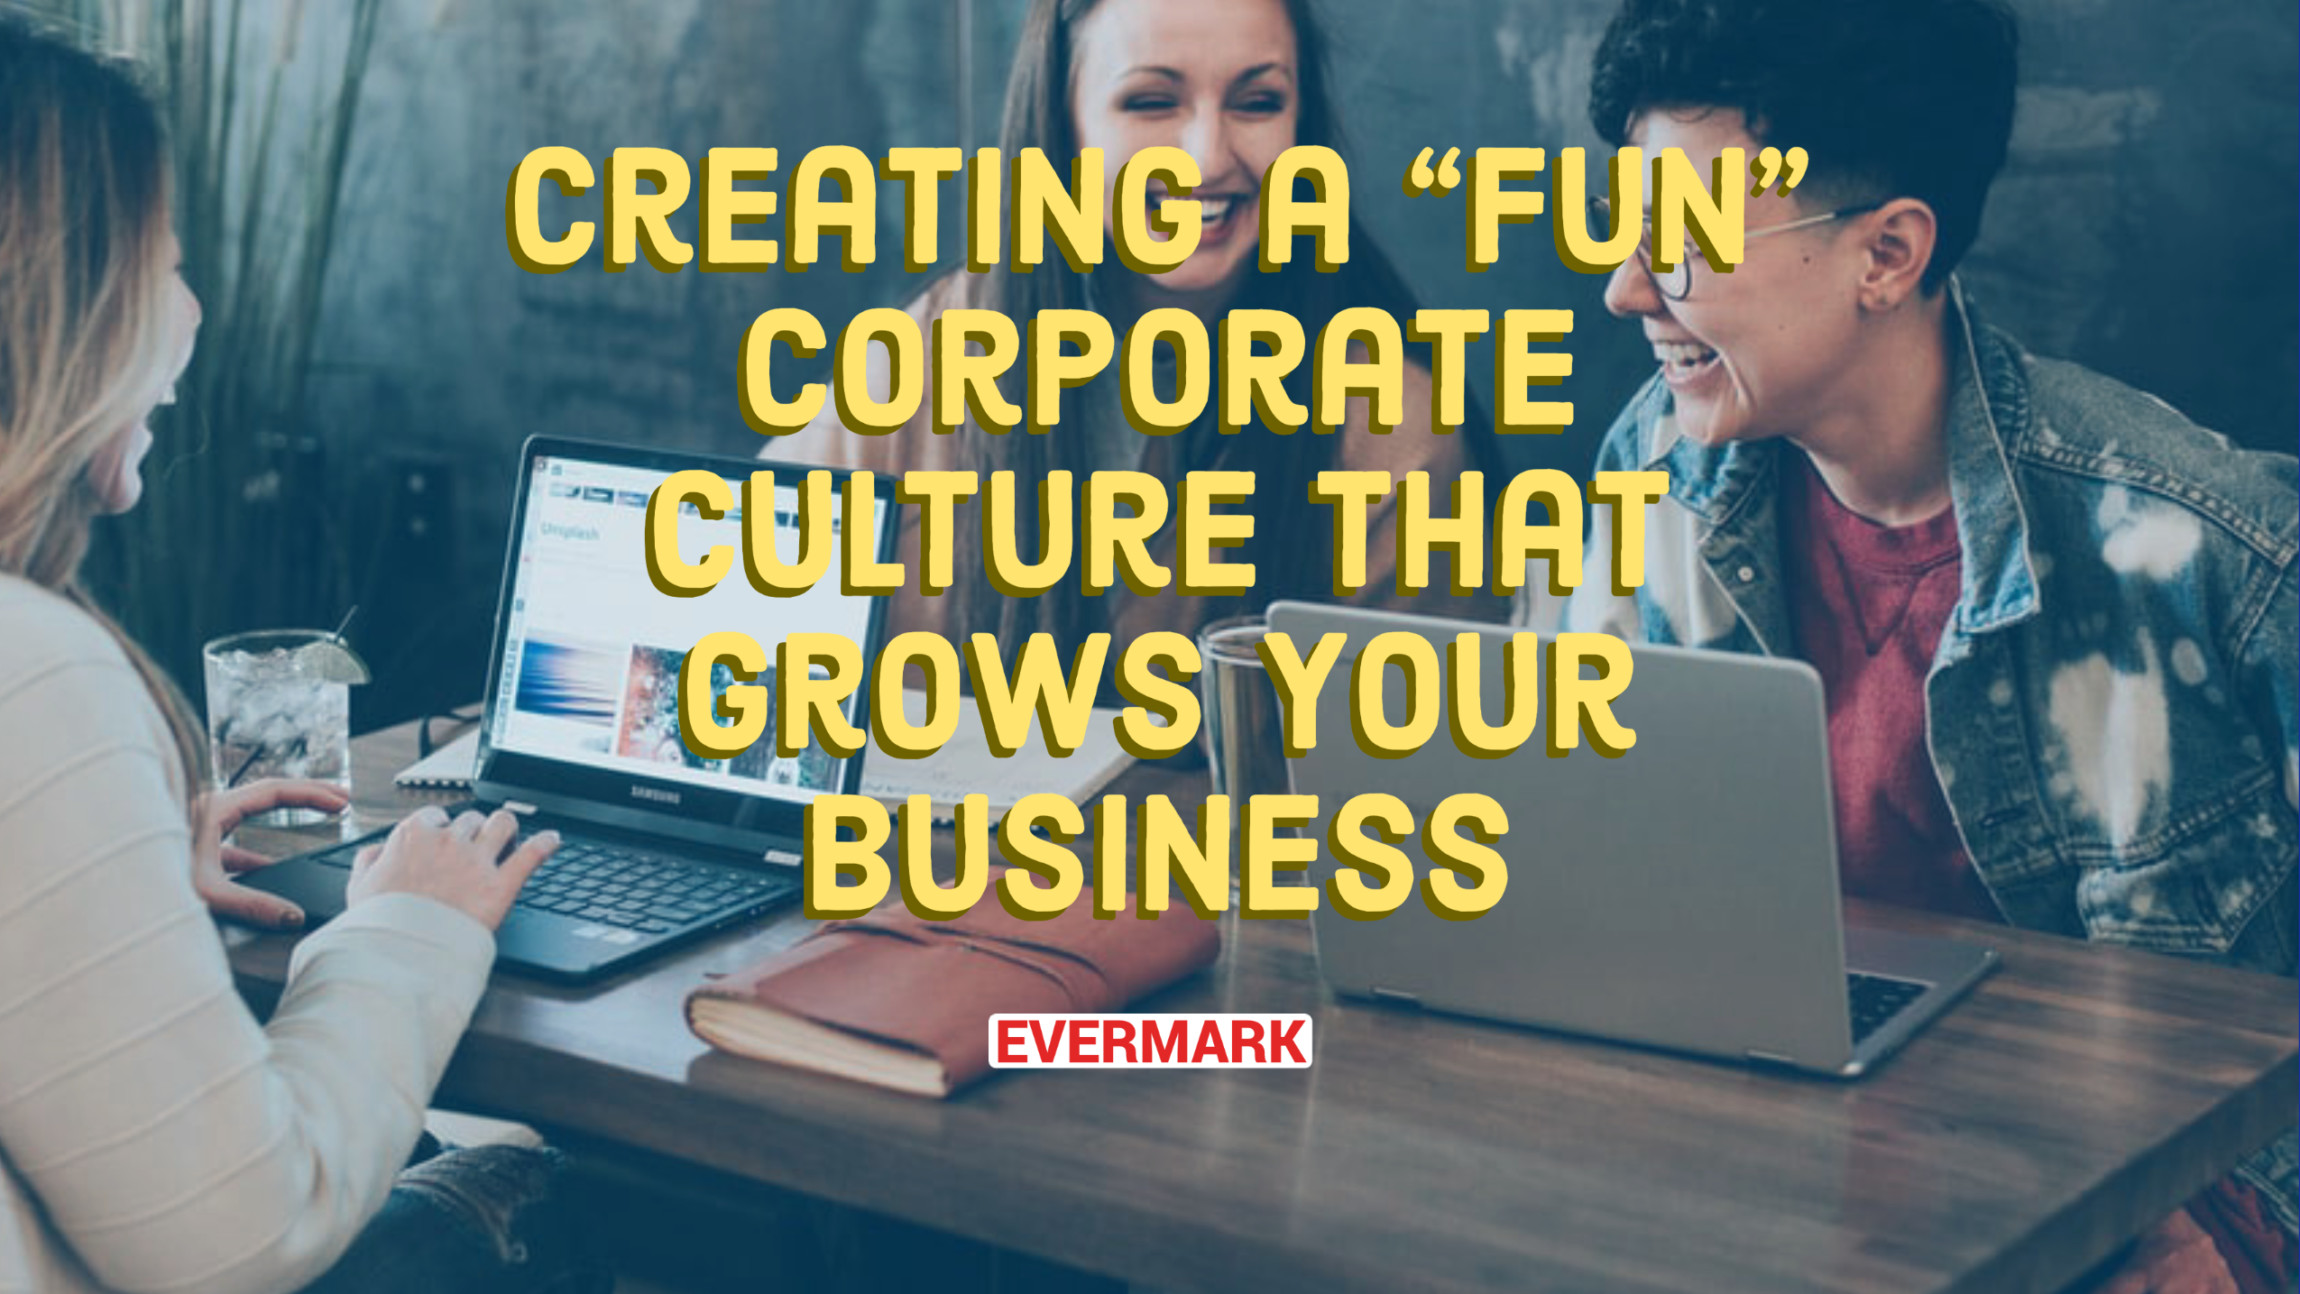 Not Just a Laughing Matter: Creating a “Fun” Corporate Culture that Grows Your Business